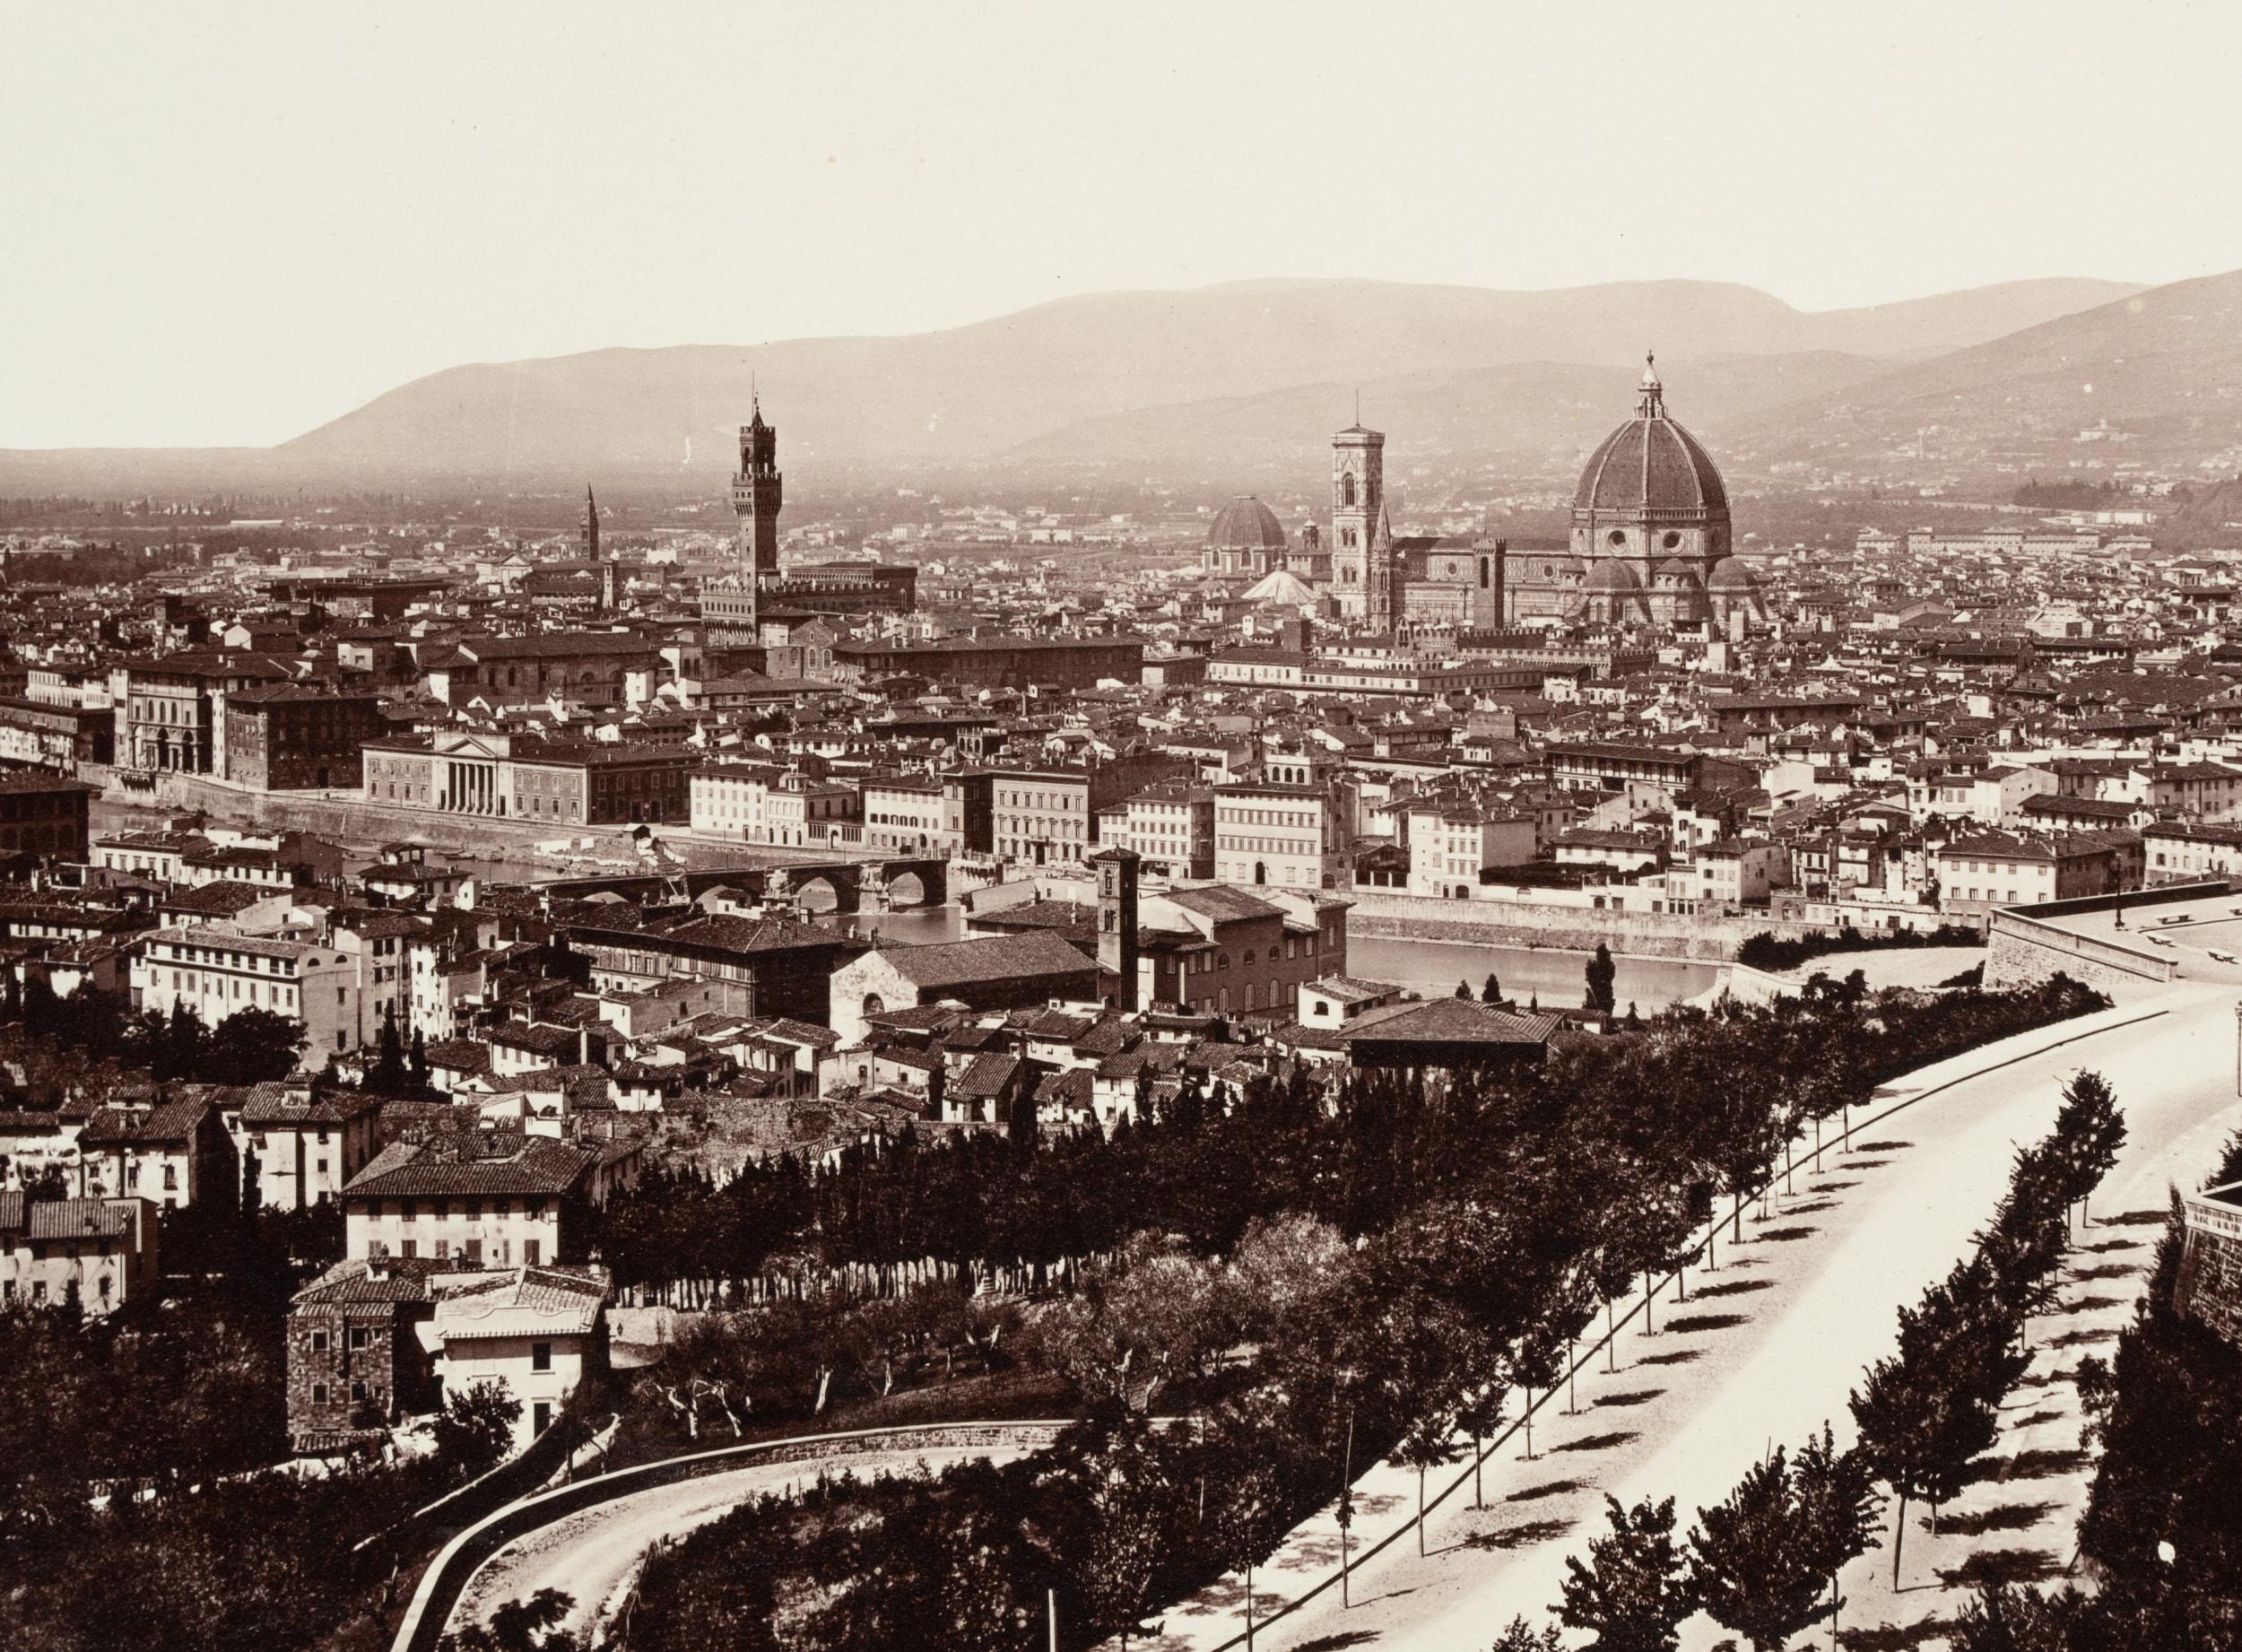 View of Florence - Photograph by Fratelli Alinari